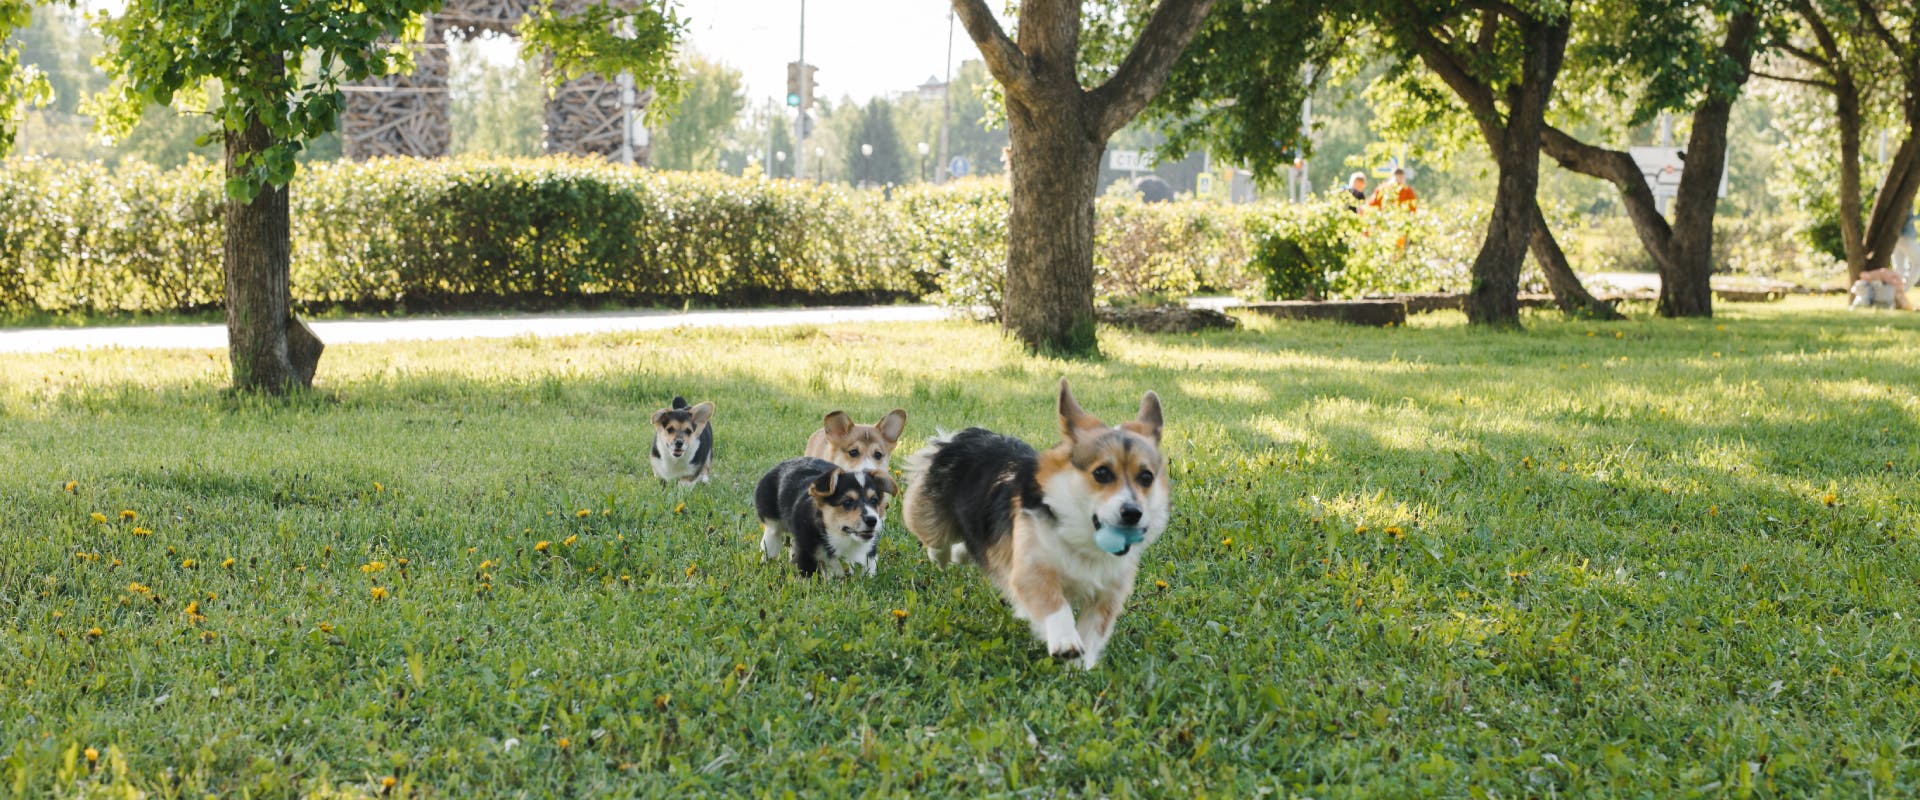 A group of Corgis play in a dog park in Los Angeles.